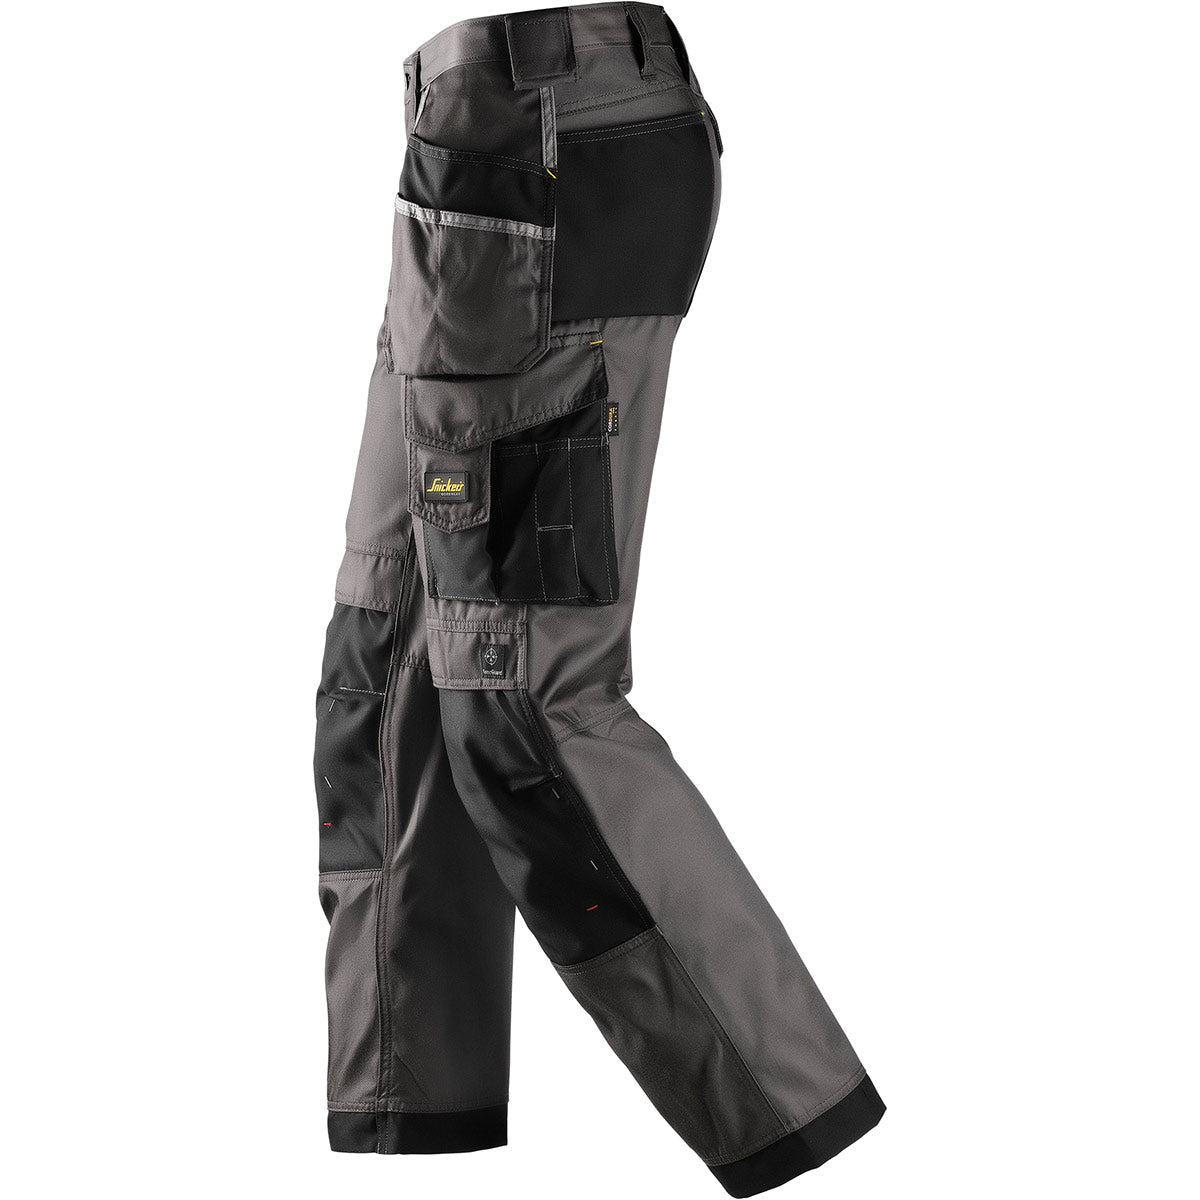 Snickers 3212 Work Trousers Holster Pockets